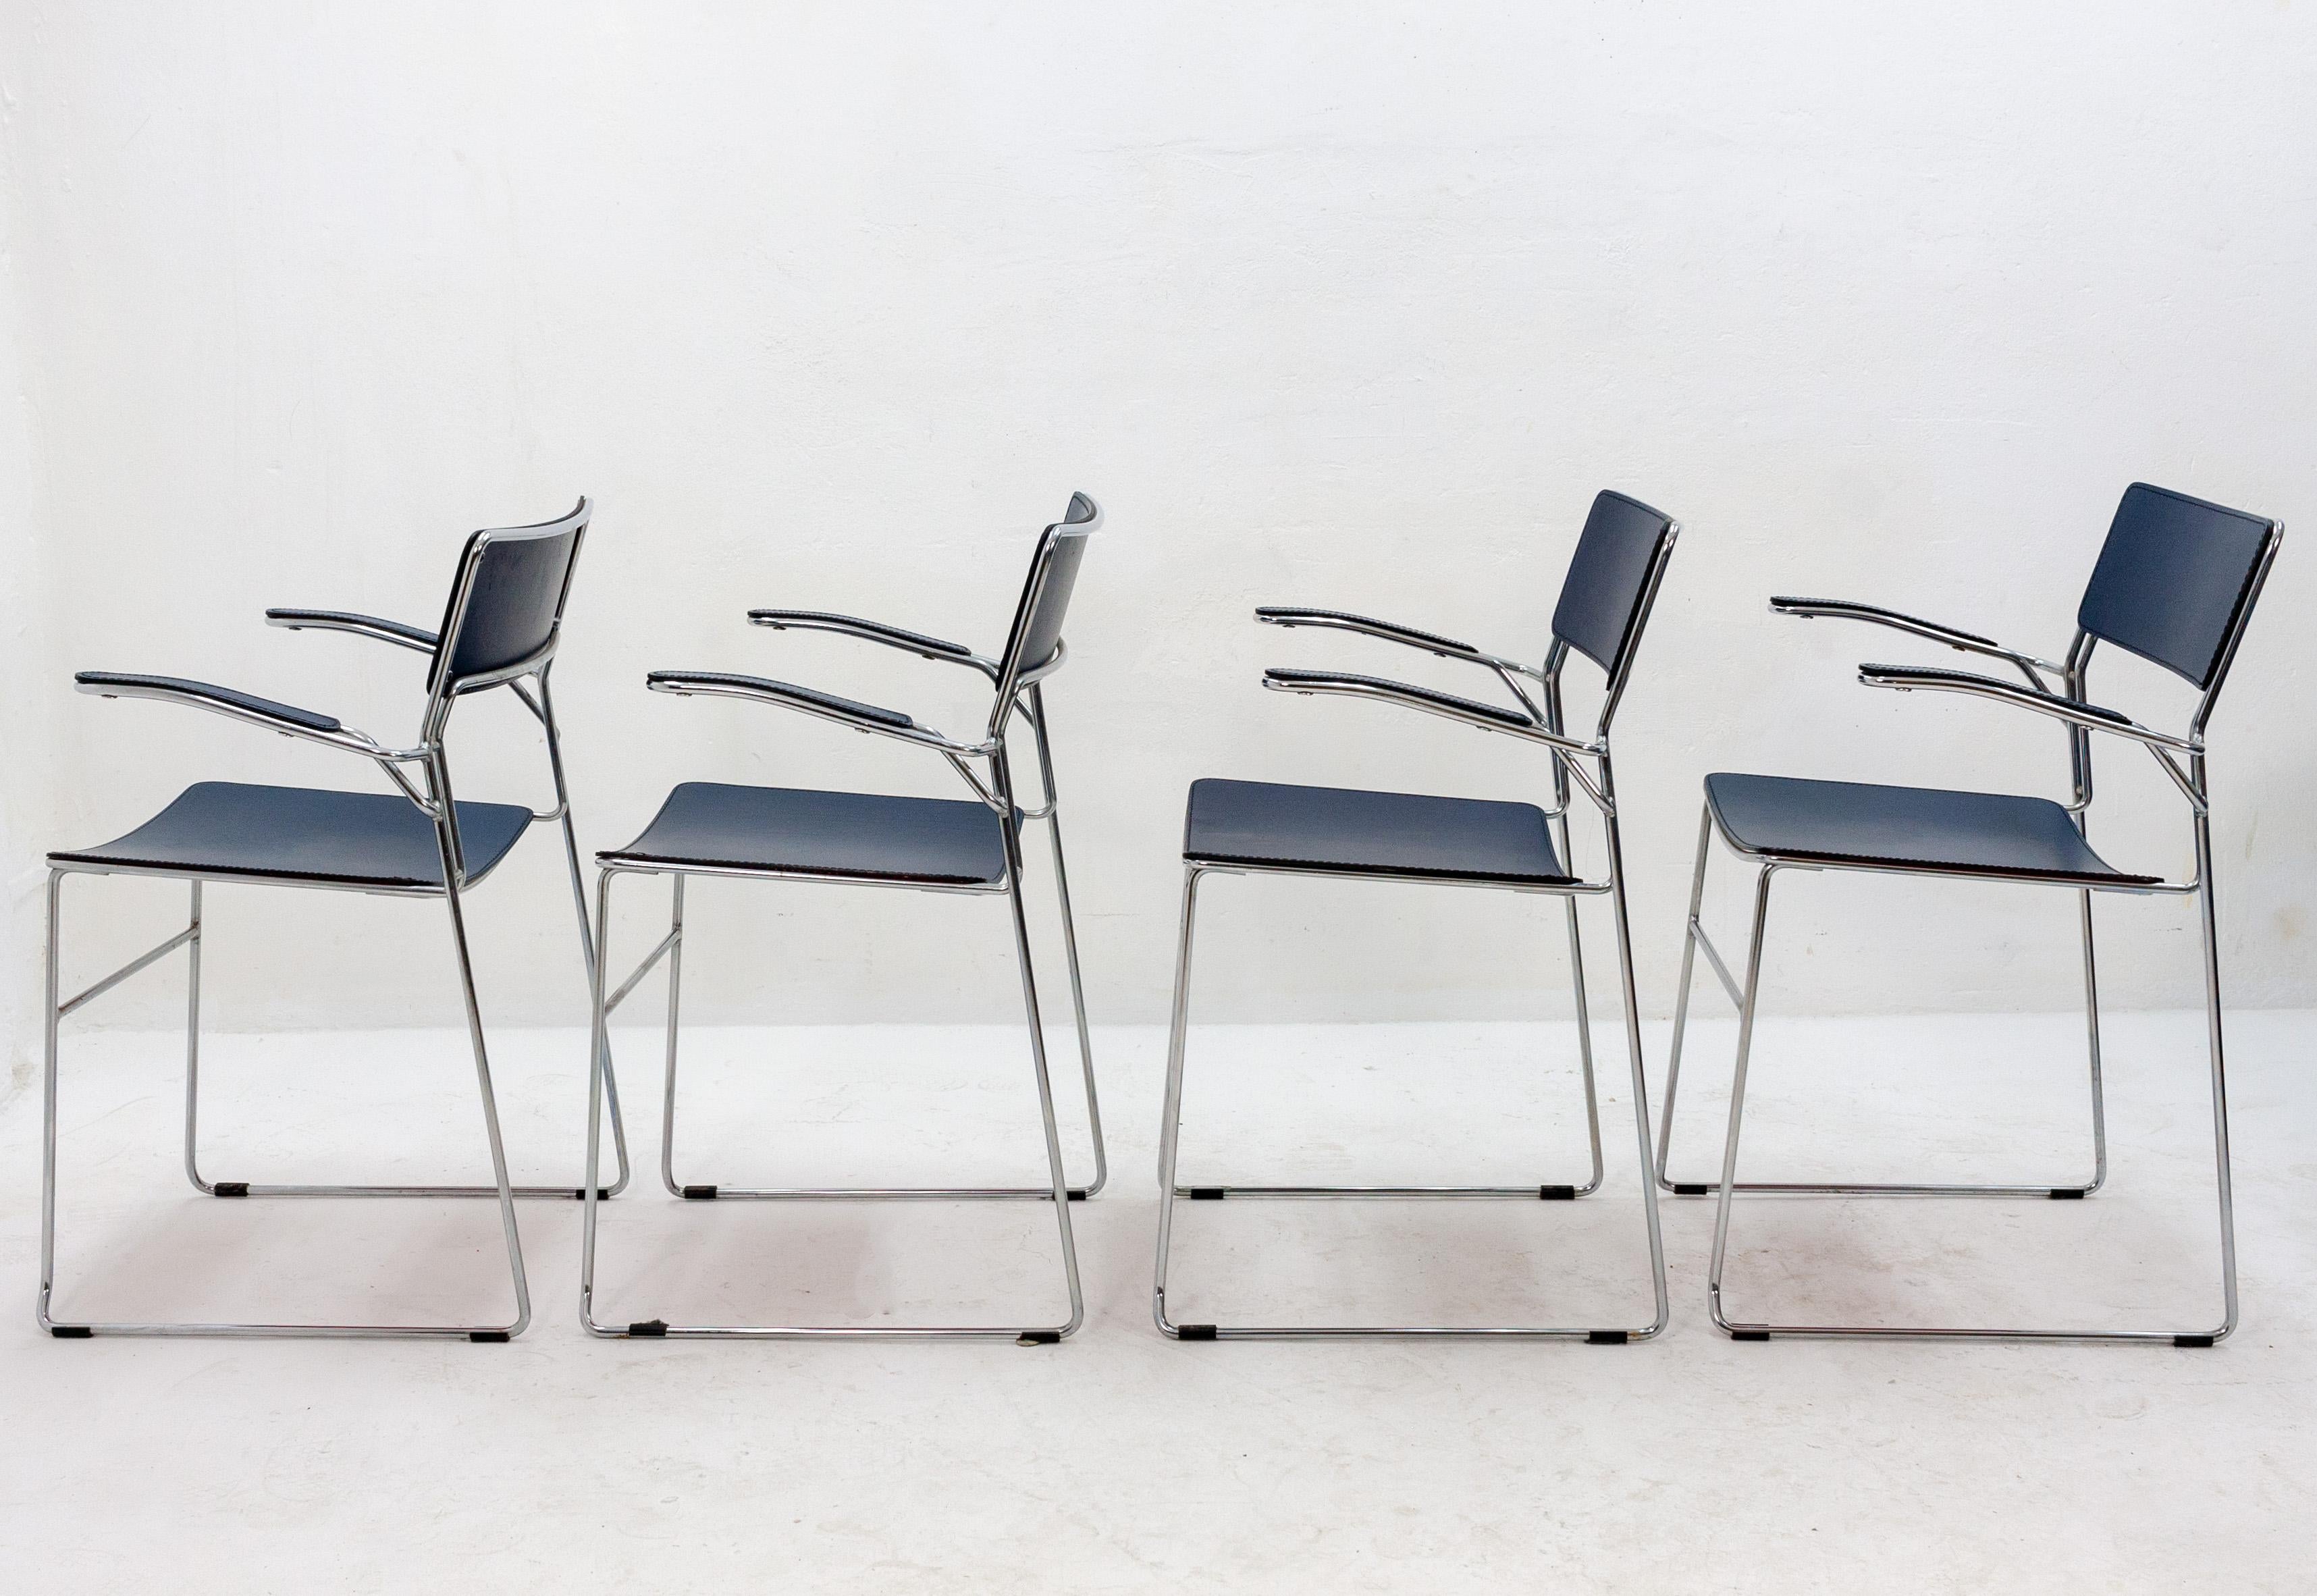 Four beautiful Arrben chairs. Model Sultana in dark blue saddle leather on a chromed steel frame.
Top quality stackable Italian chairs from the 1980s.